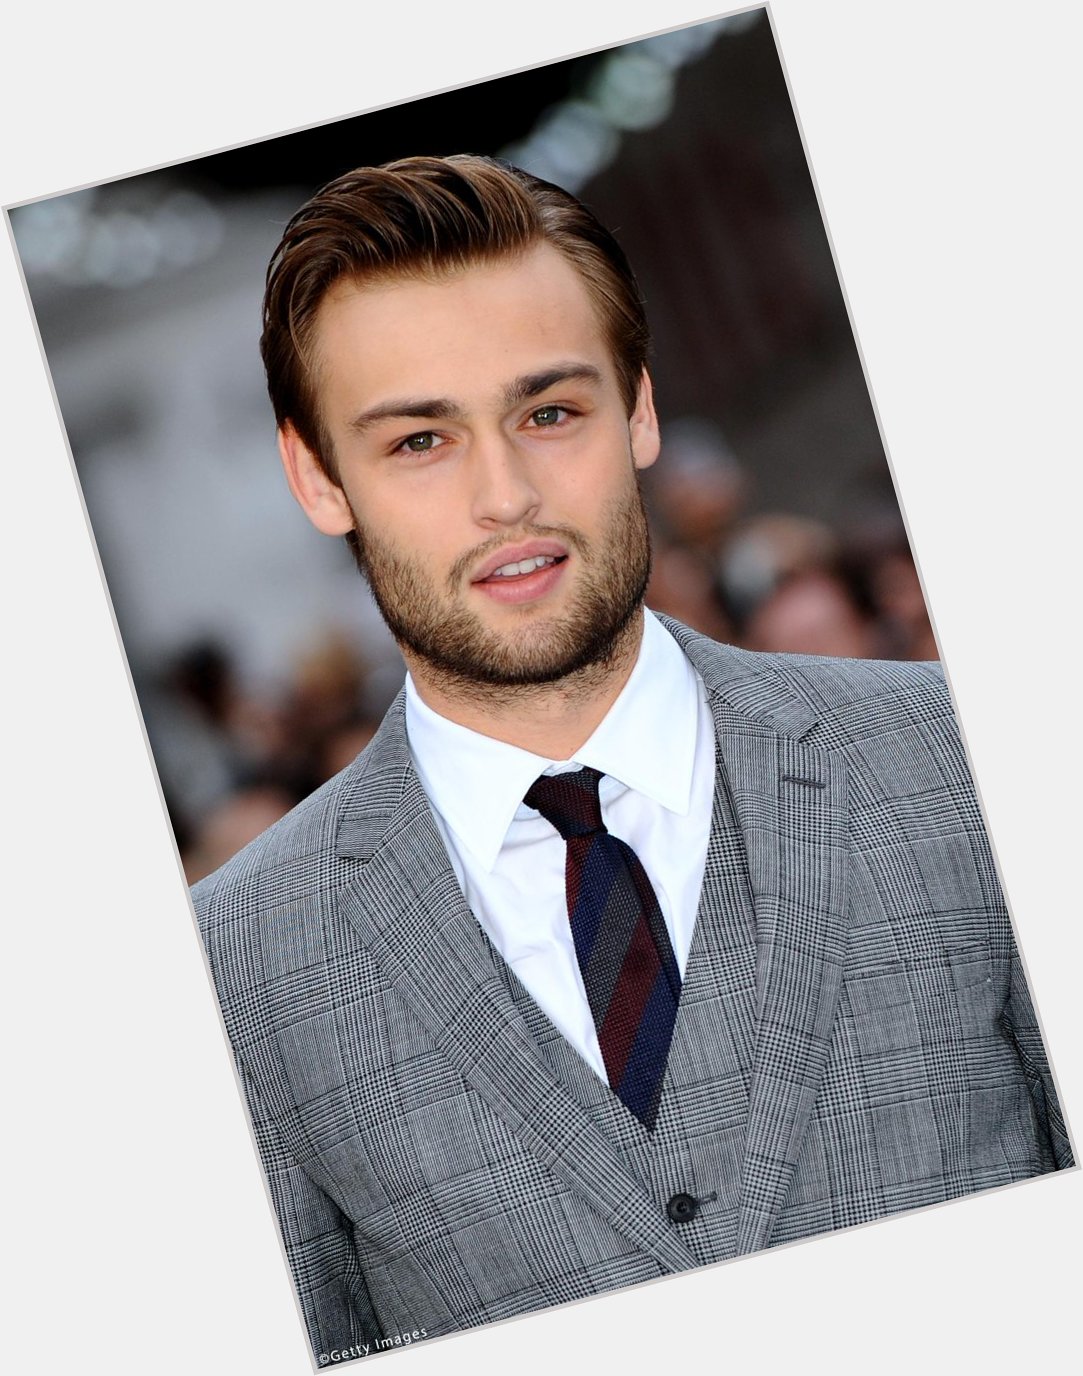 Happy birthday to the ever-dapper gent, Douglas Booth  